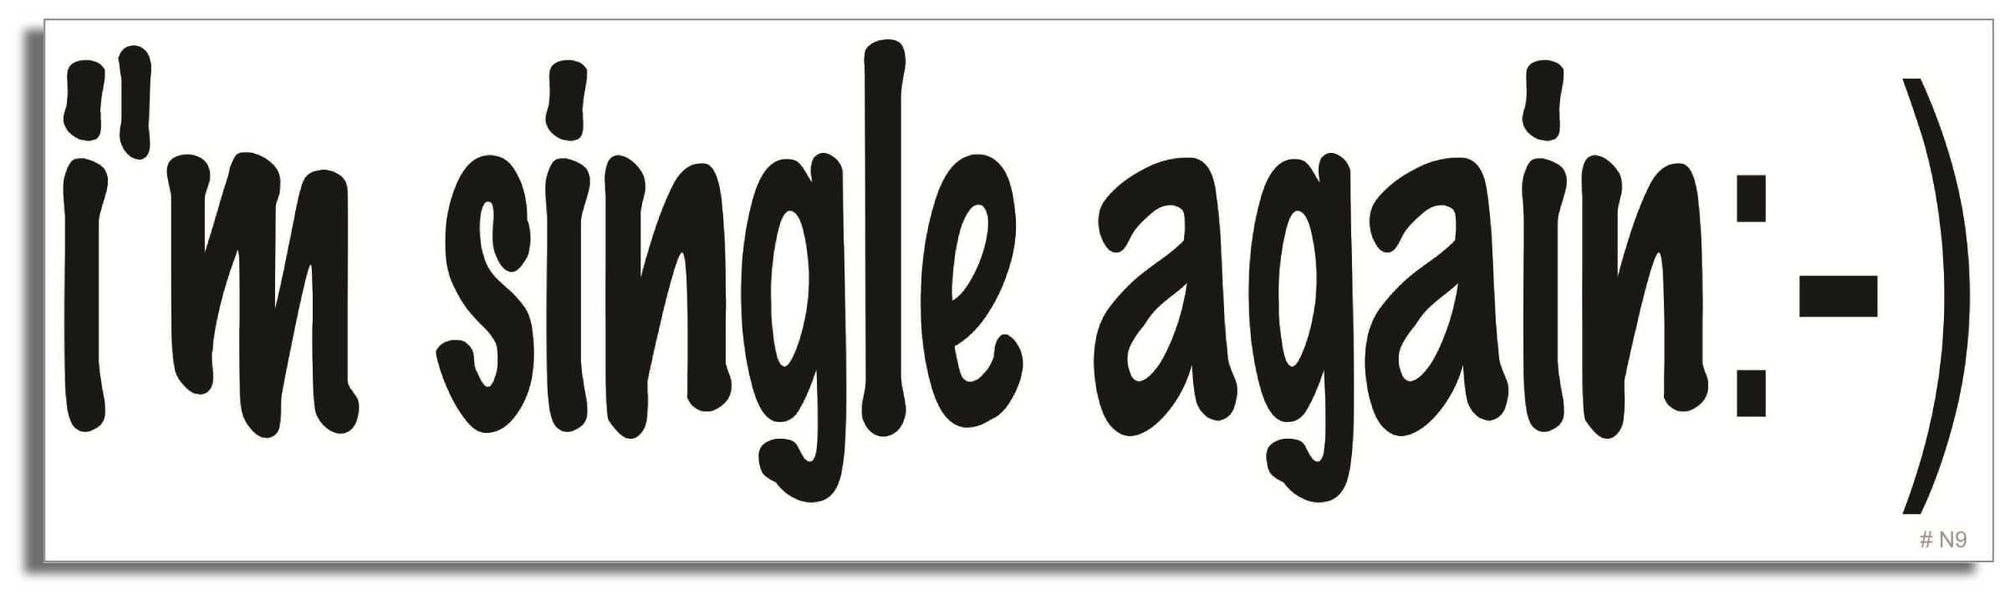 I'm single again :-) - 3" x 10" Bumper Sticker--Car Magnet- -  Decal Car Car Magnet-dirty Bumper Sticker Car Magnet I'm single again :-)-   Decal for carsadult, funny, funny quote, funny saying, naughty